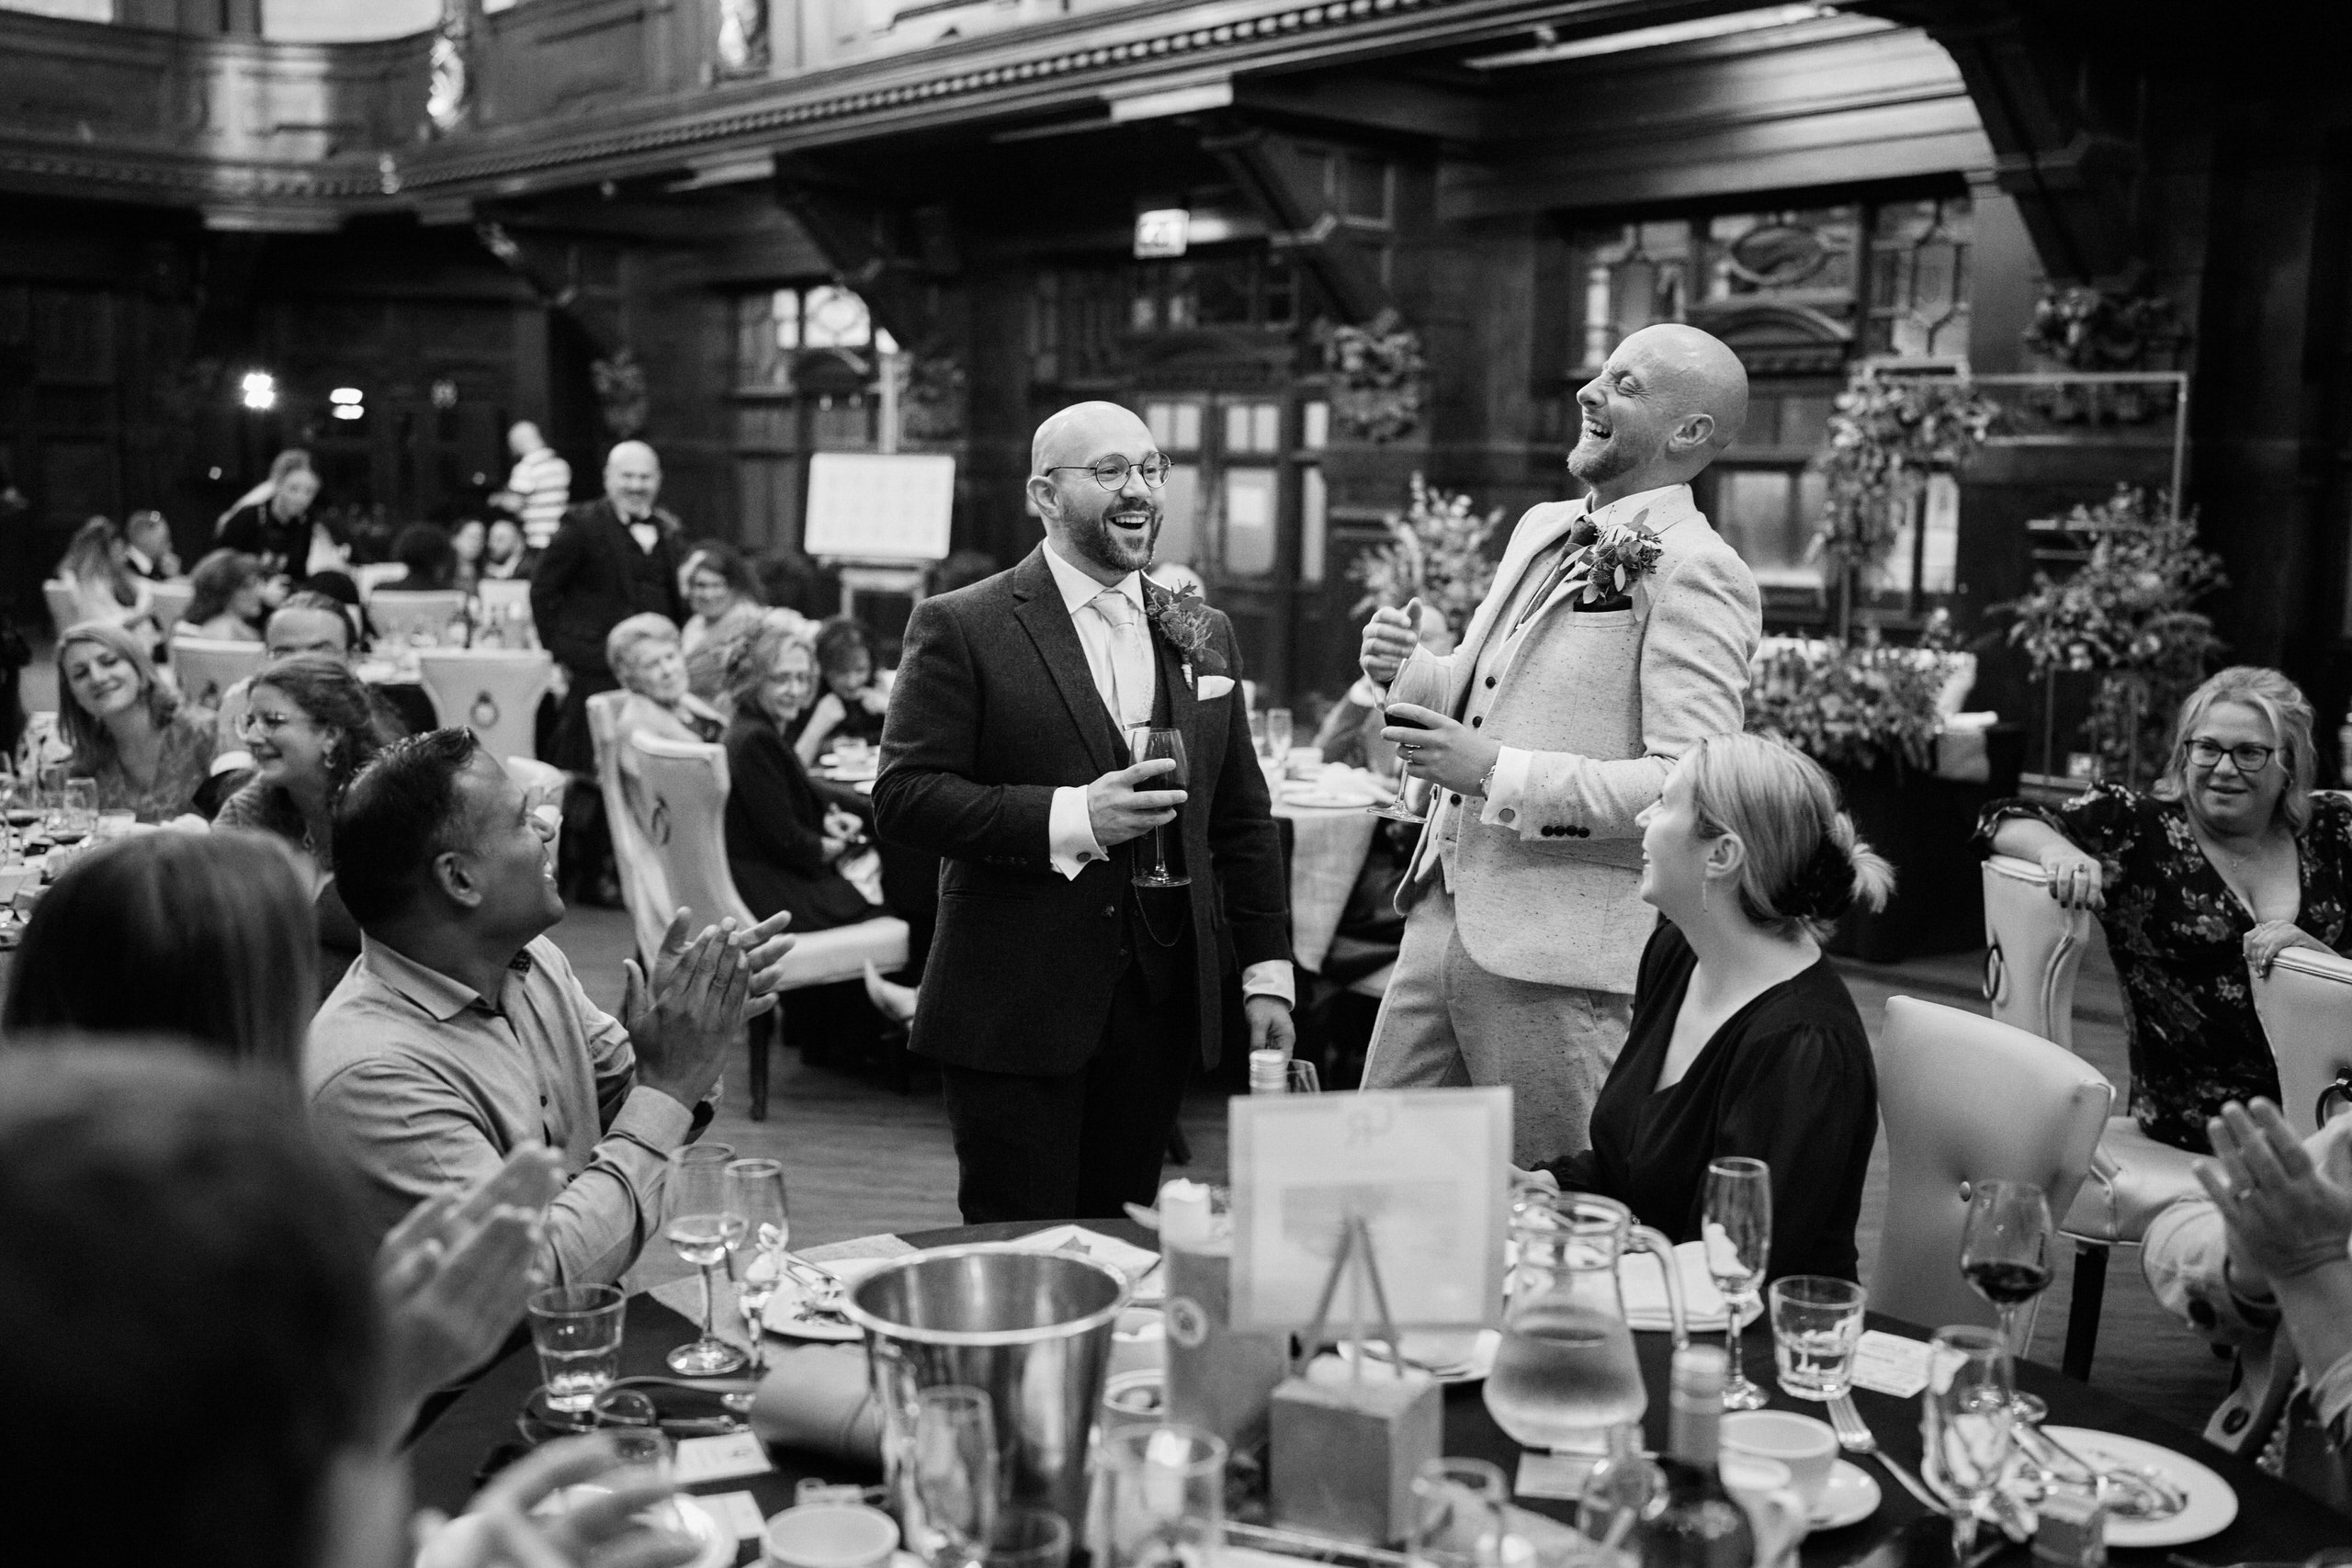 A grayscale picture of two guys at a wedding.